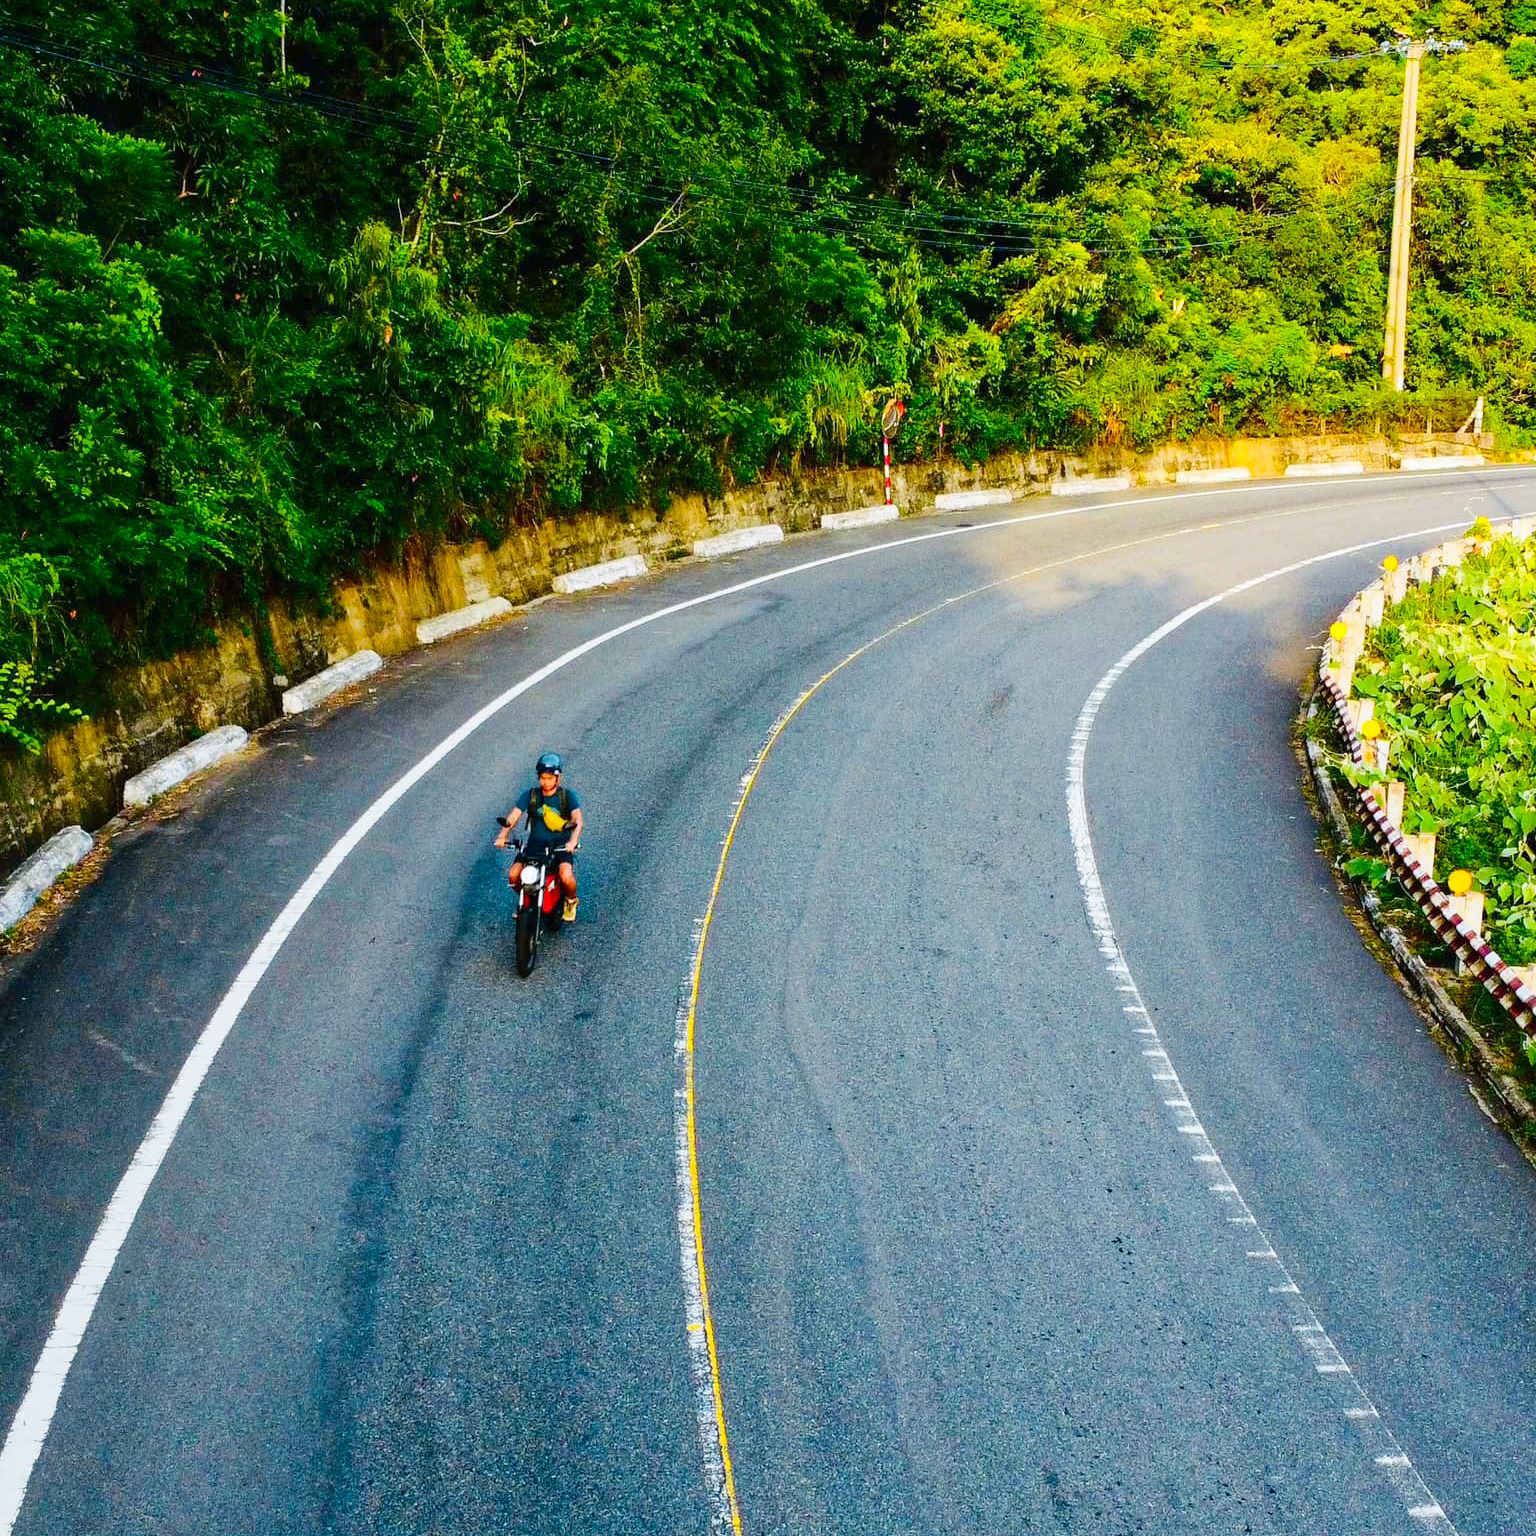 If you have a lot of time and want to go further, don't miss the road to Hai Van Pass. The price to rent a motorbike in Da Nang is only from 80.000 VND/day. When renting, you should carefully check the motorbike, especially the front and rear brakes to ensure safe uphill and downhill.